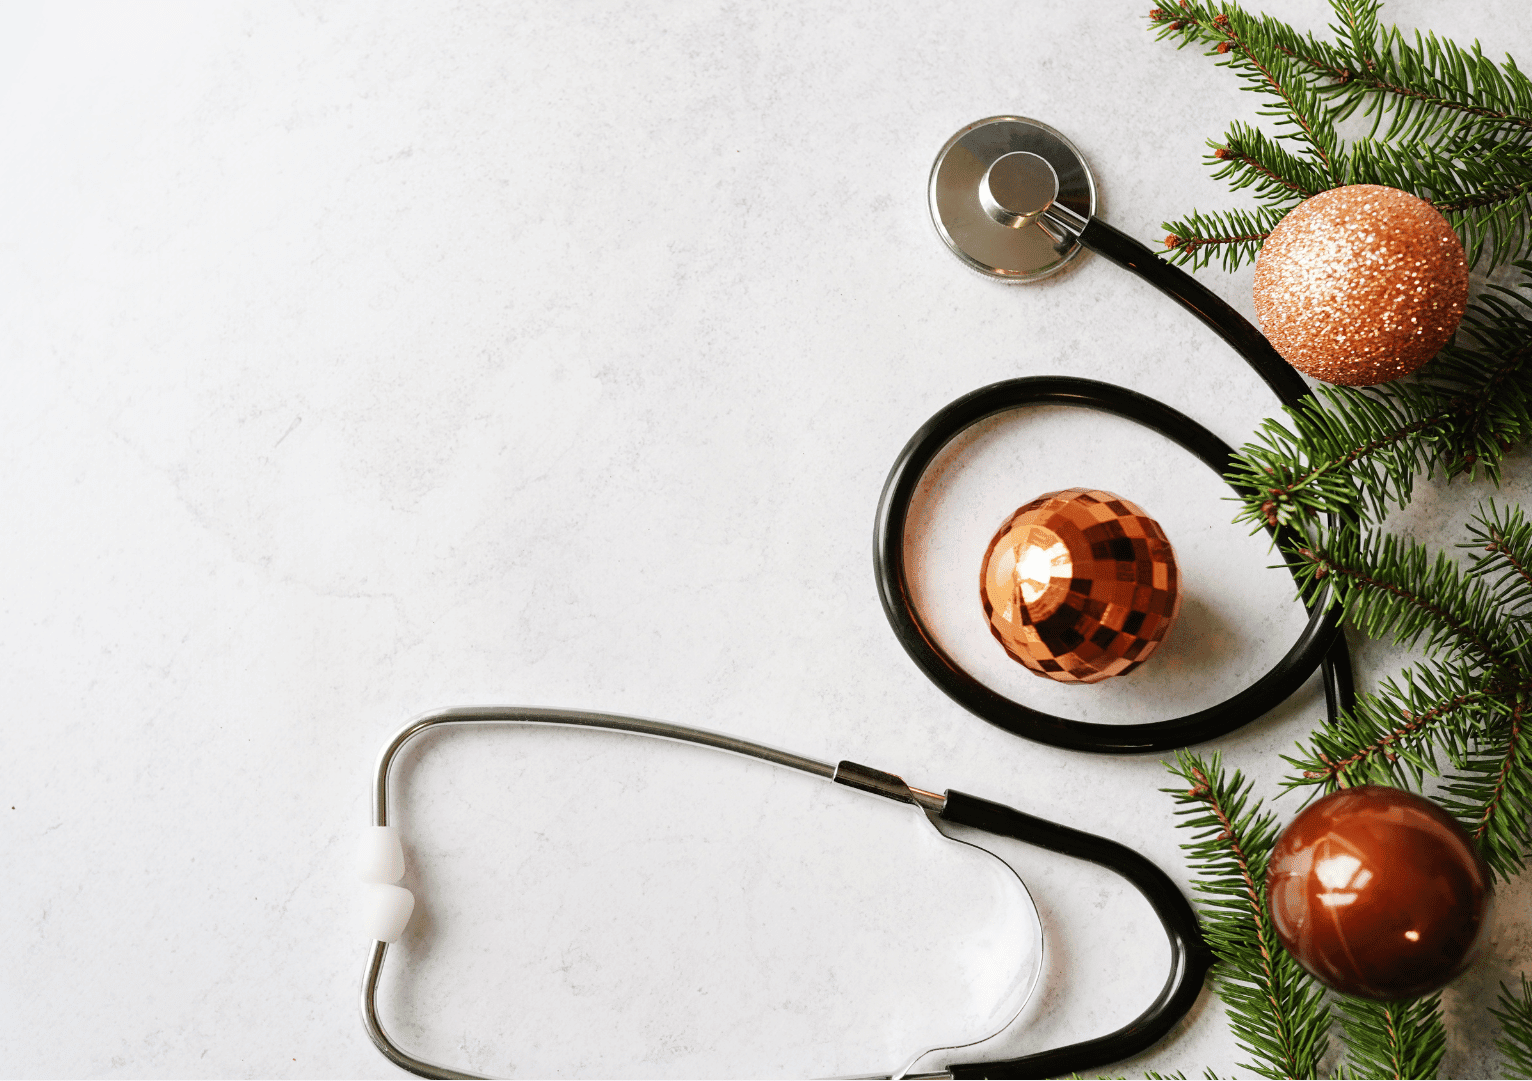 Stethoscope and pine tree and gold ornaments on a white background Christmas for nurses decor